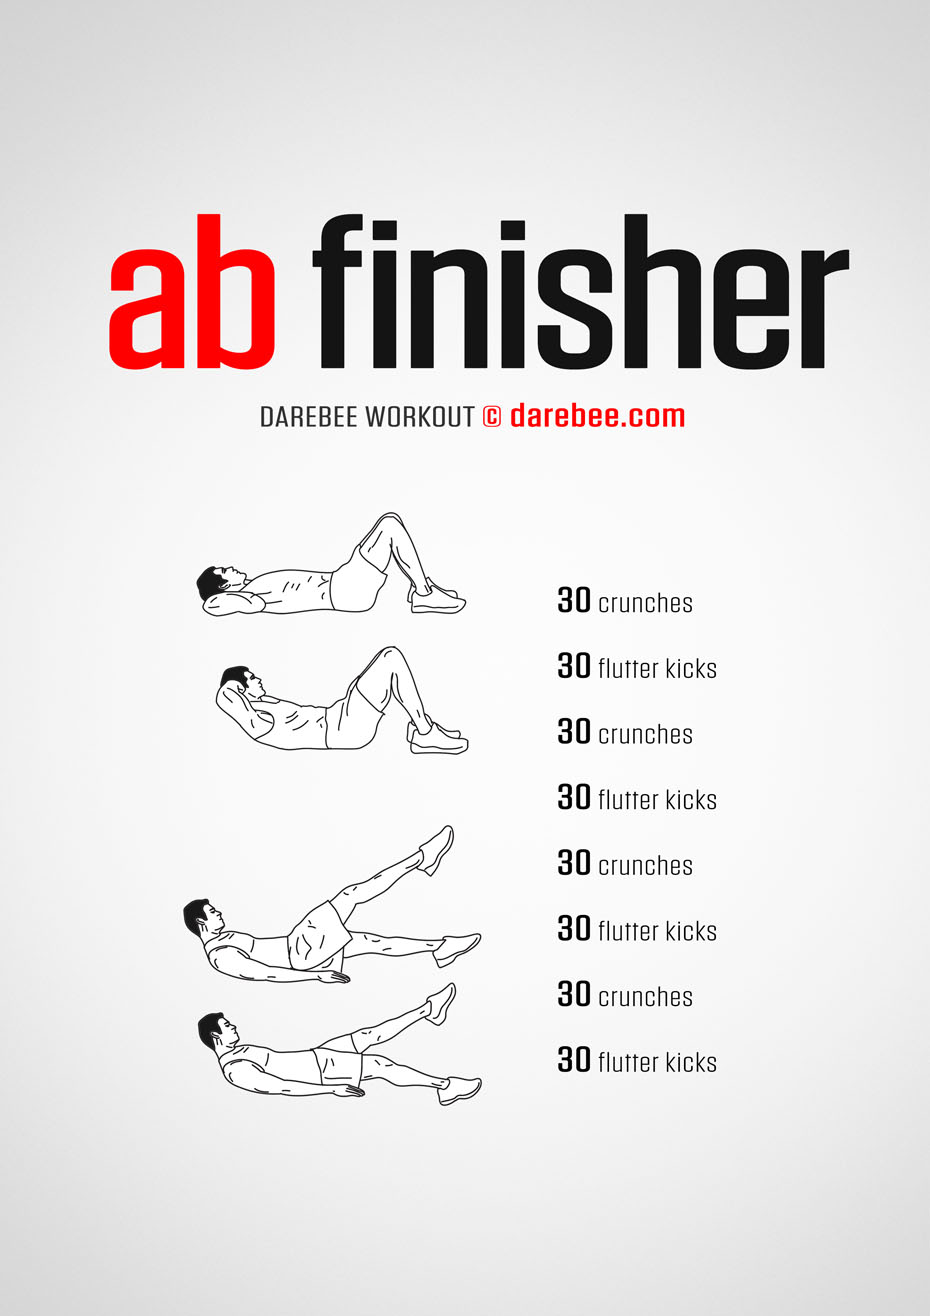 Ab-finisher is a Darebee no-equipment home workout that gives you stronger abs. 